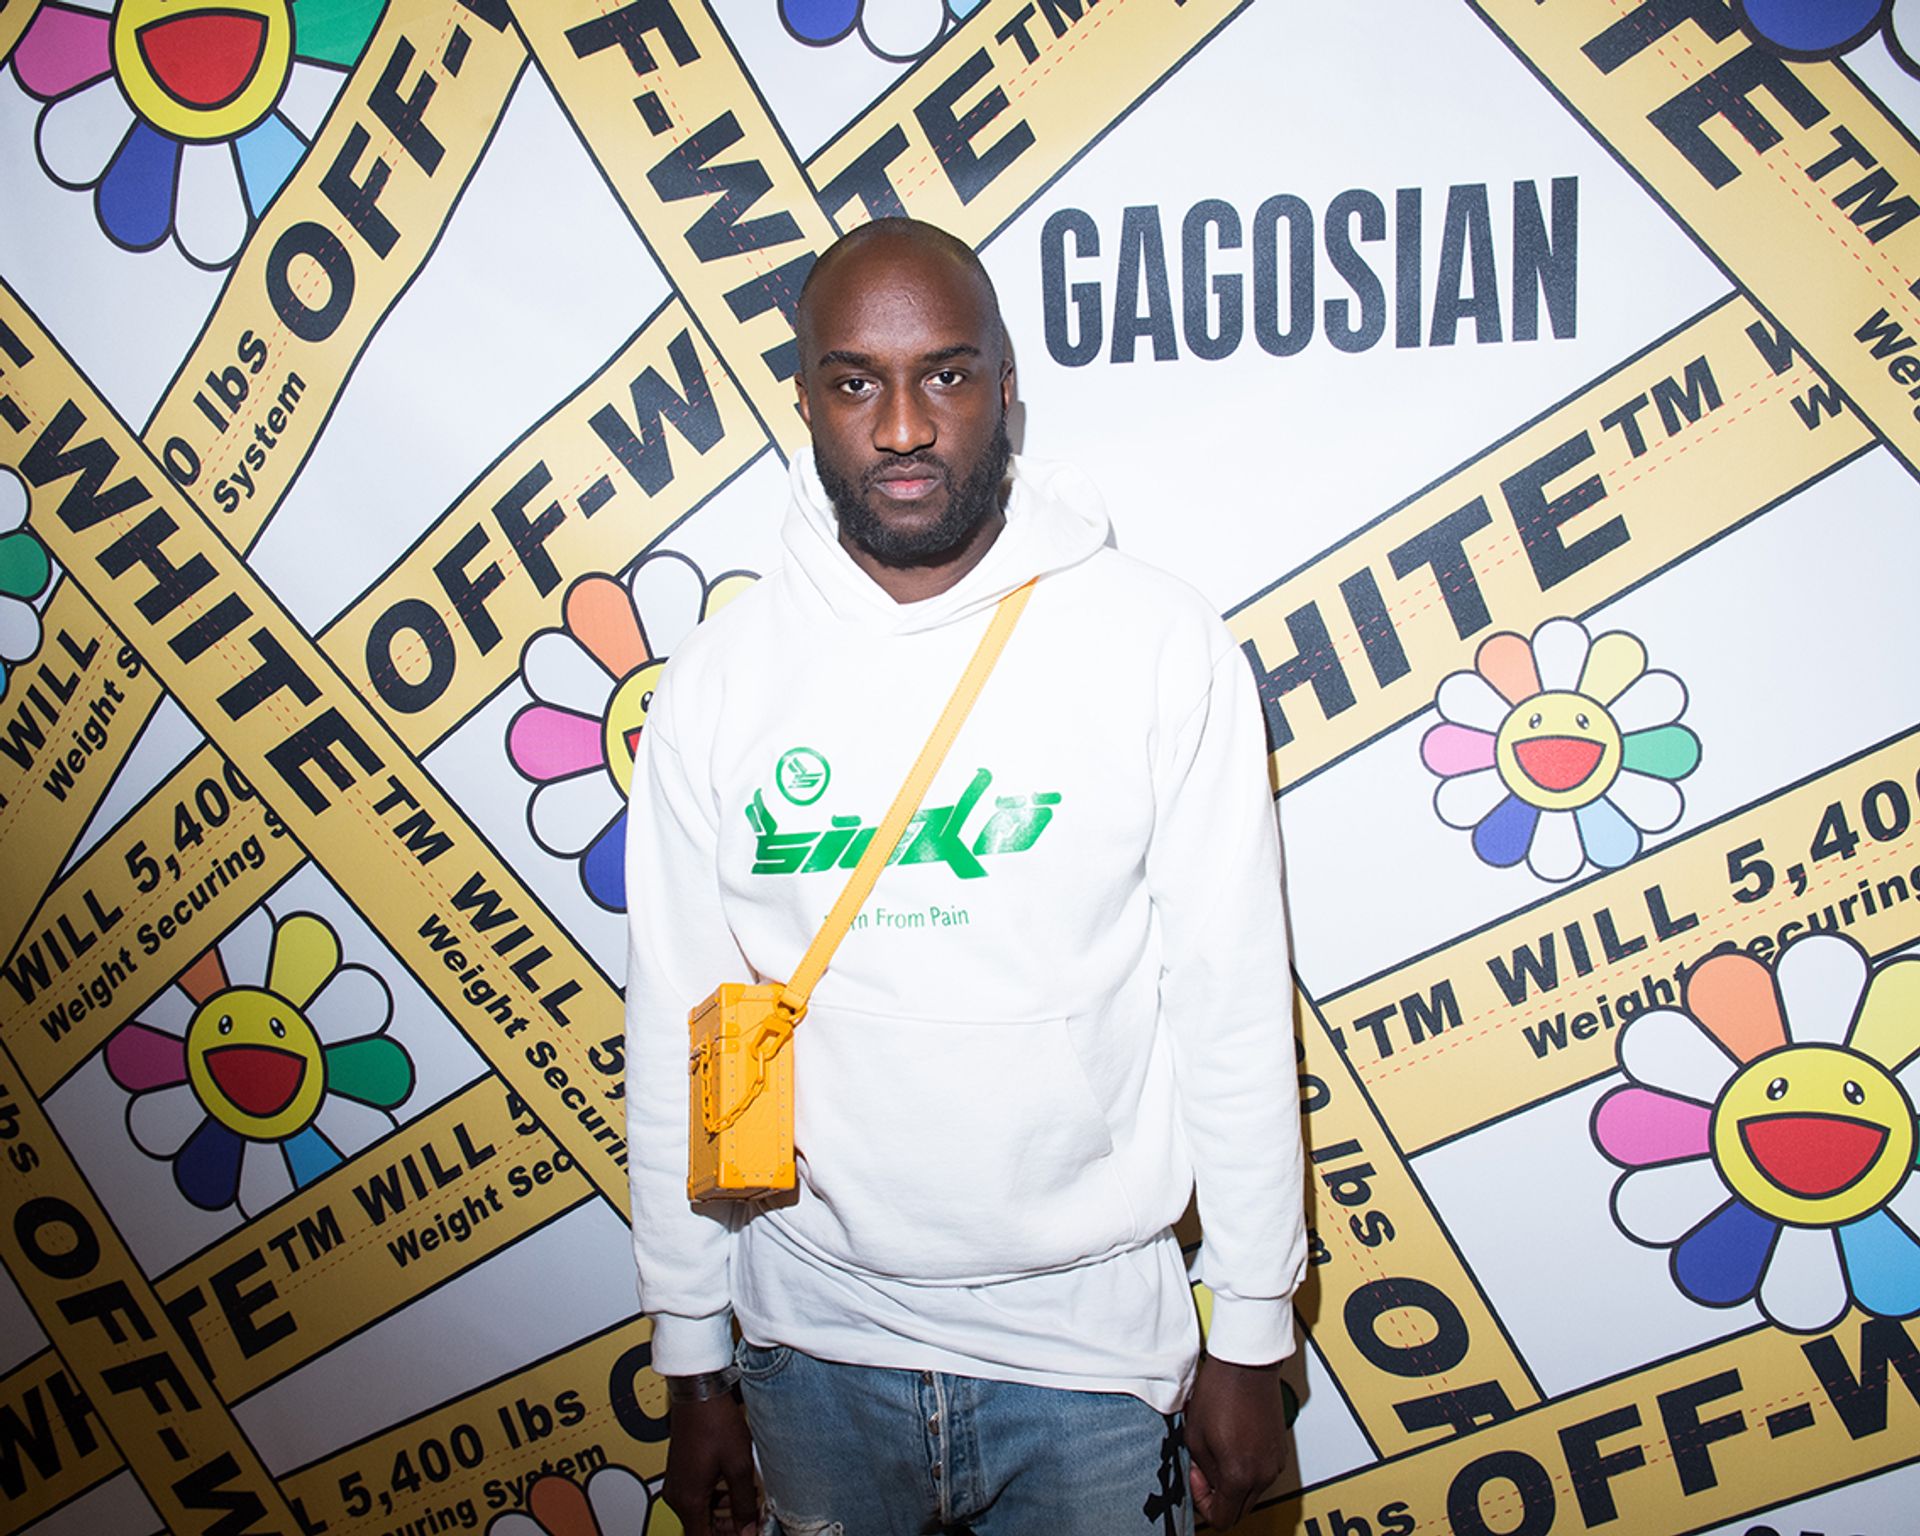 Virgil Abloh at Murakami x Abloh—Technocolor 2 at Gagosian during Paris Fashion Week in 2018 Photo by: Victor Boyko/Getty Images